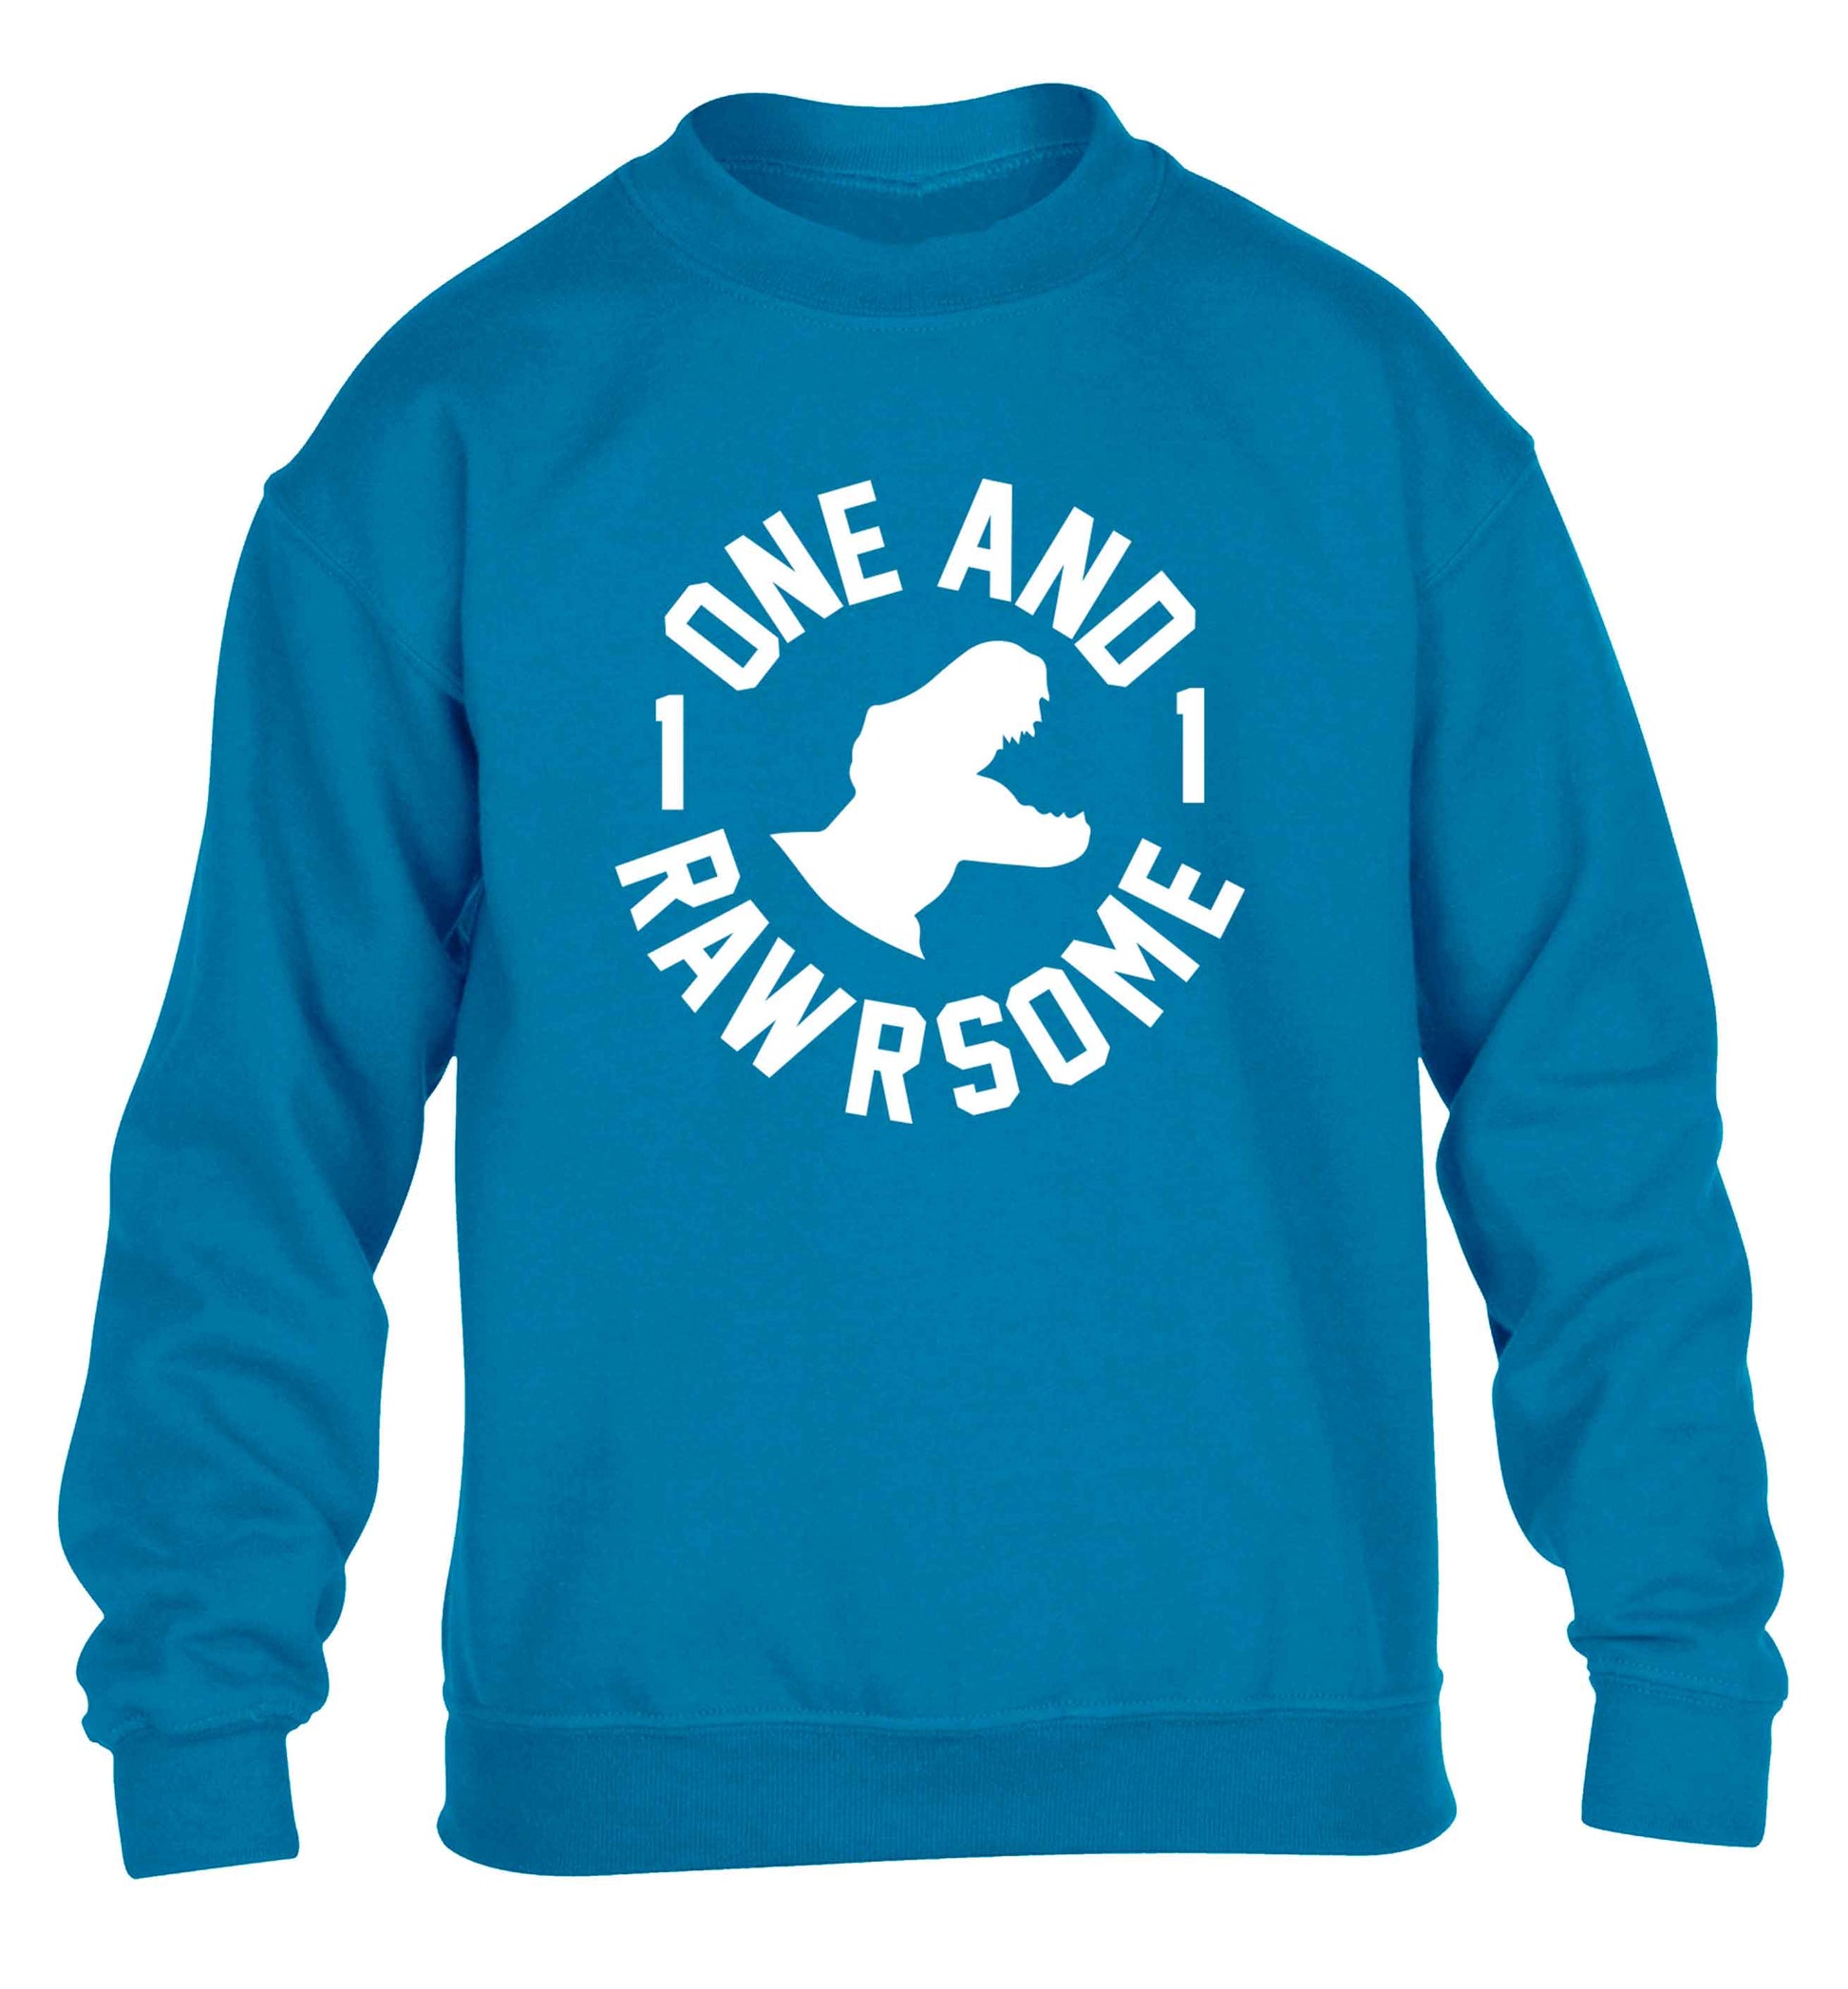 One and Rawrsome children's blue sweater 12-13 Years